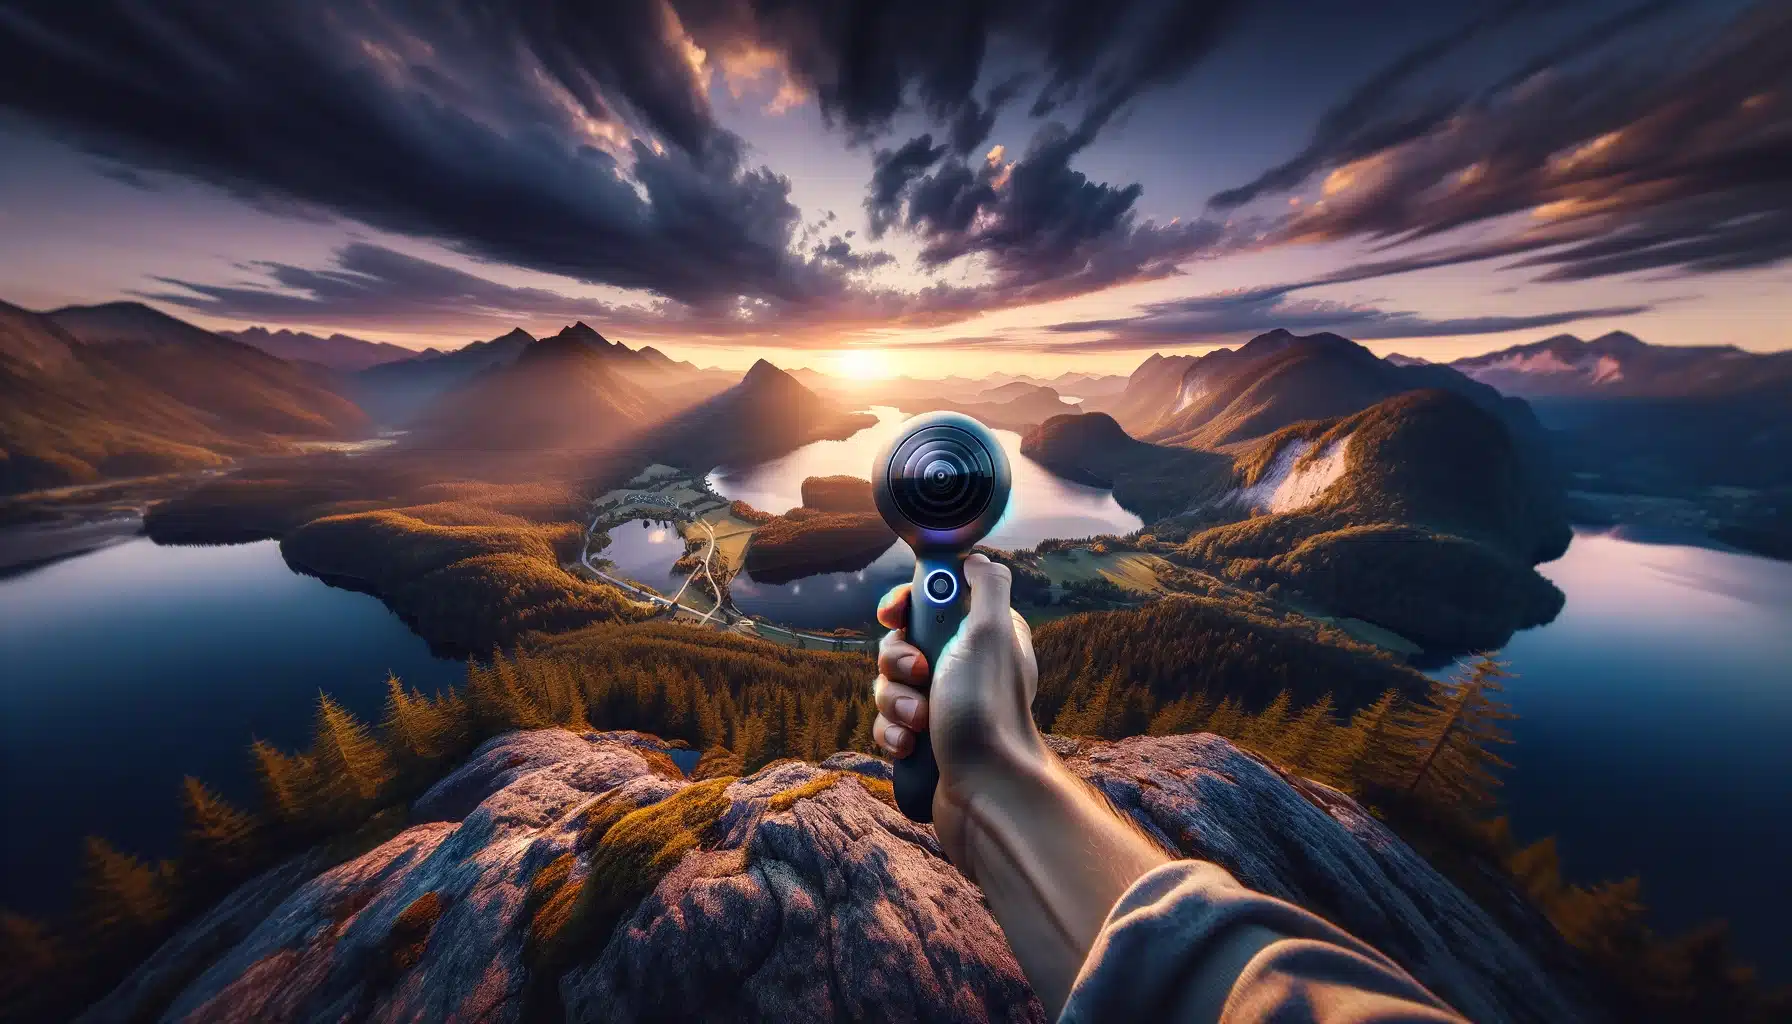 Person in an outdoor setting Apprehending a cycloidal- portrait with a camera, with a panoramic view of mountains, lakes, and forests at dusk.